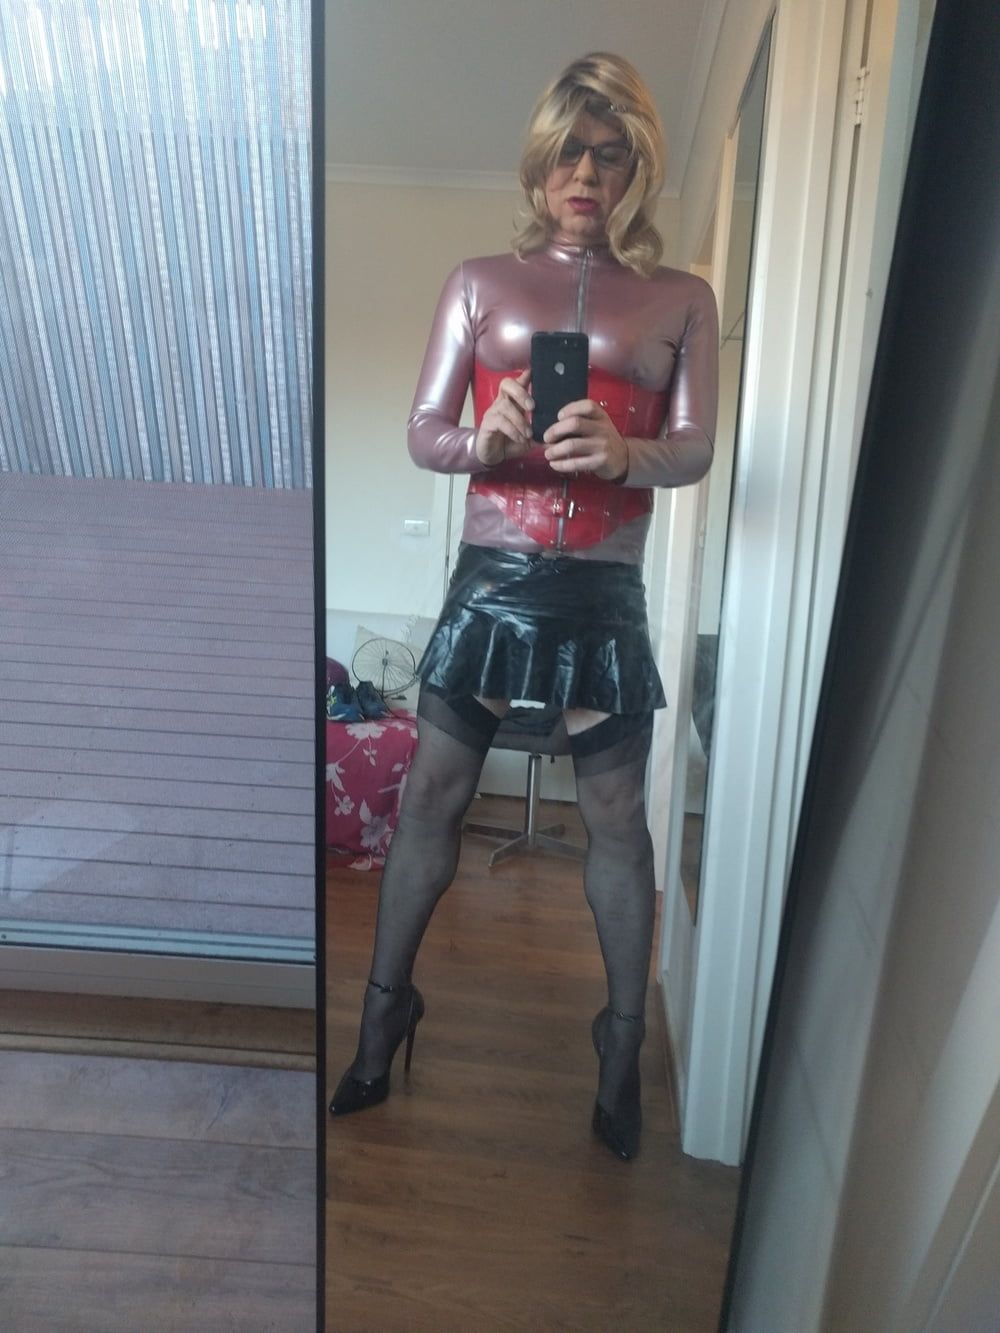 Back as a short blonde latex girl #3